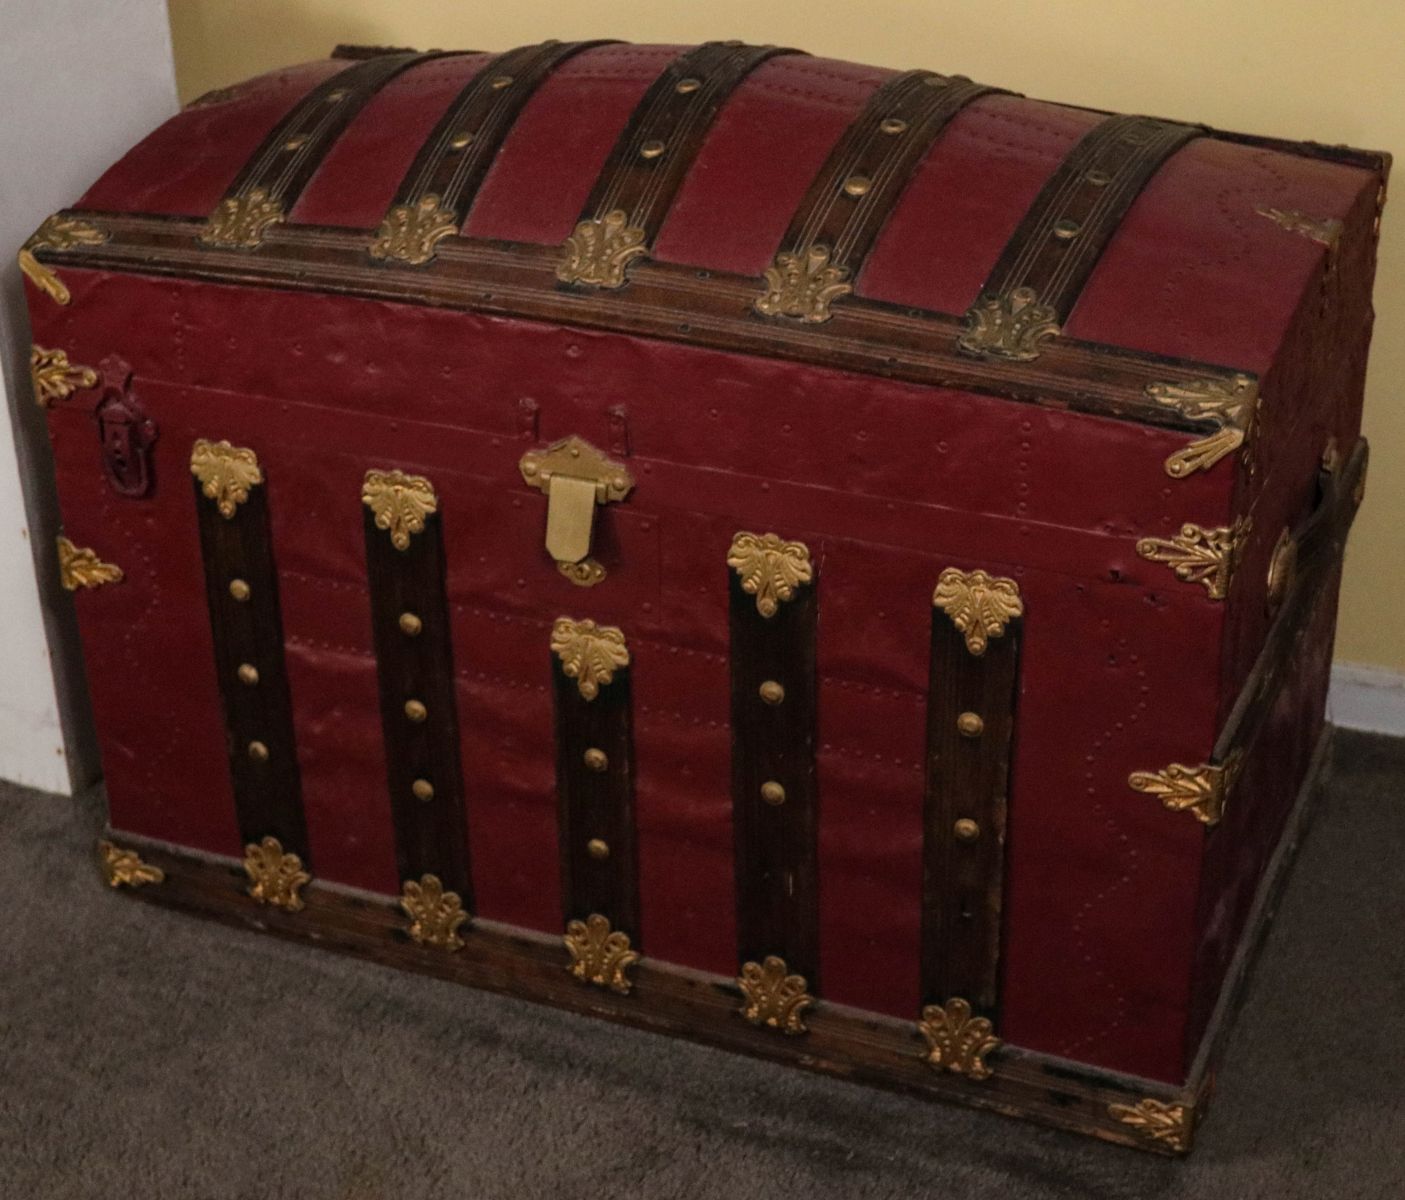 A 19TH CENTURY 'HUMP BACK' TRAVEL TRUNK WITH WOOD